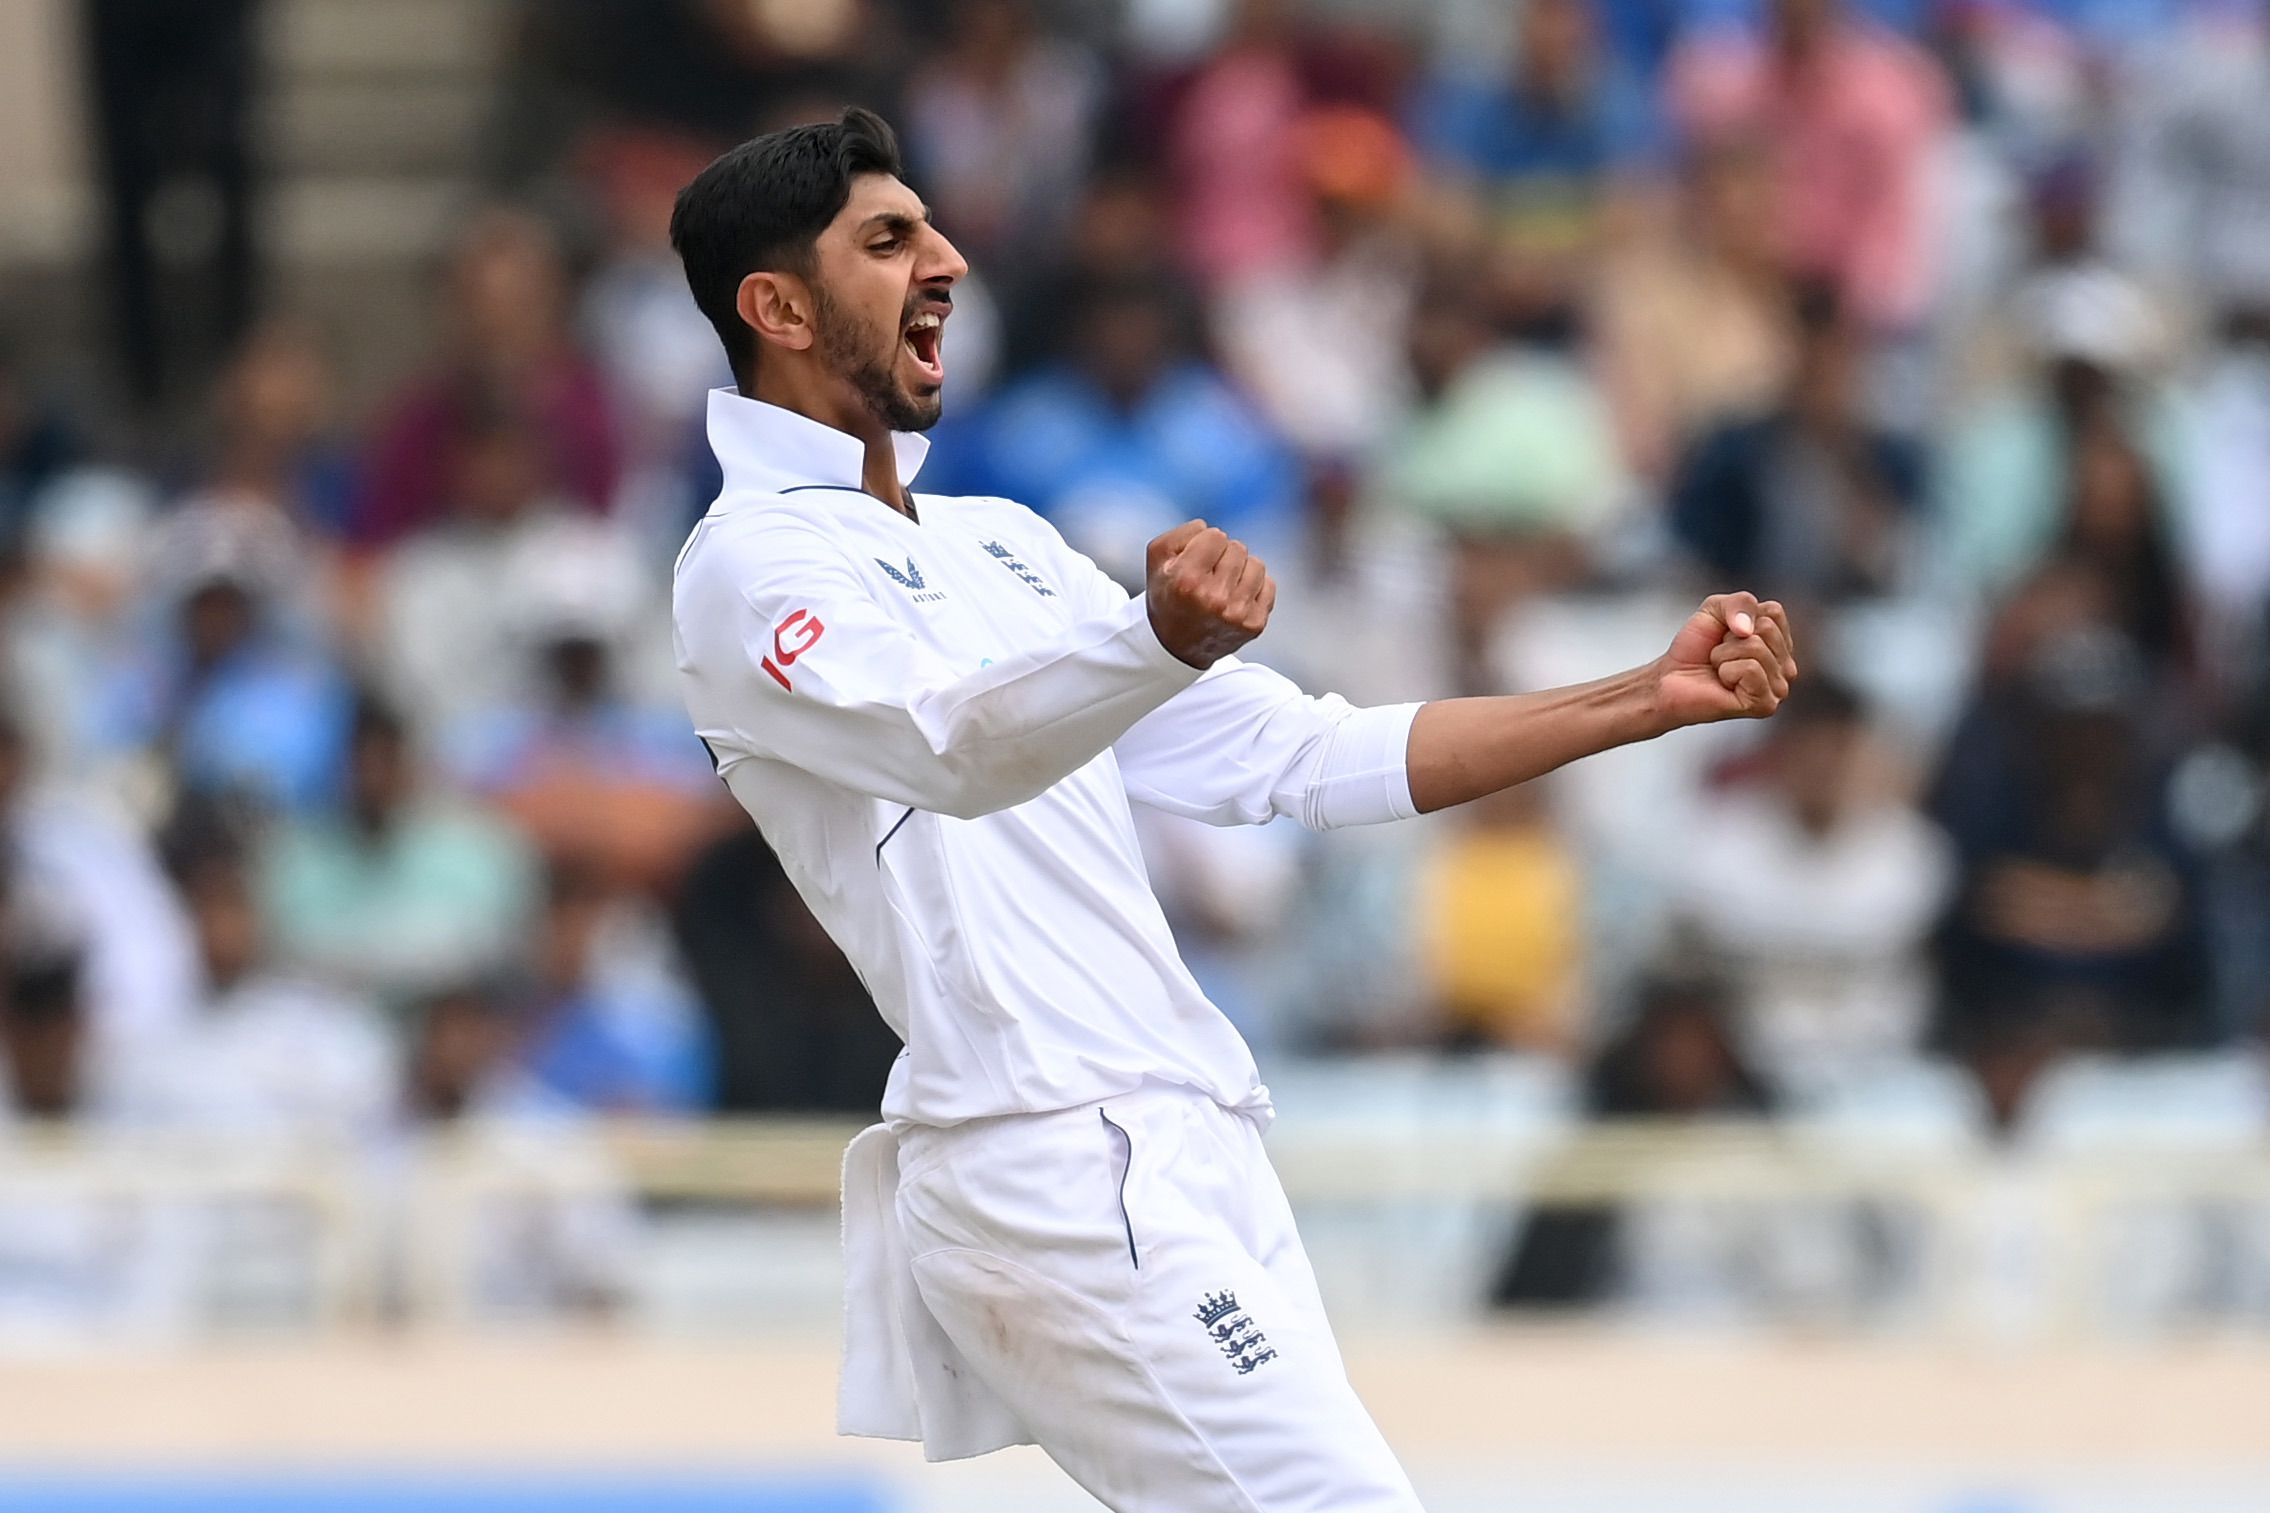 England rookie Shoaib Bashir bowls 31 overs in a row to claim first five-wicket haul against India